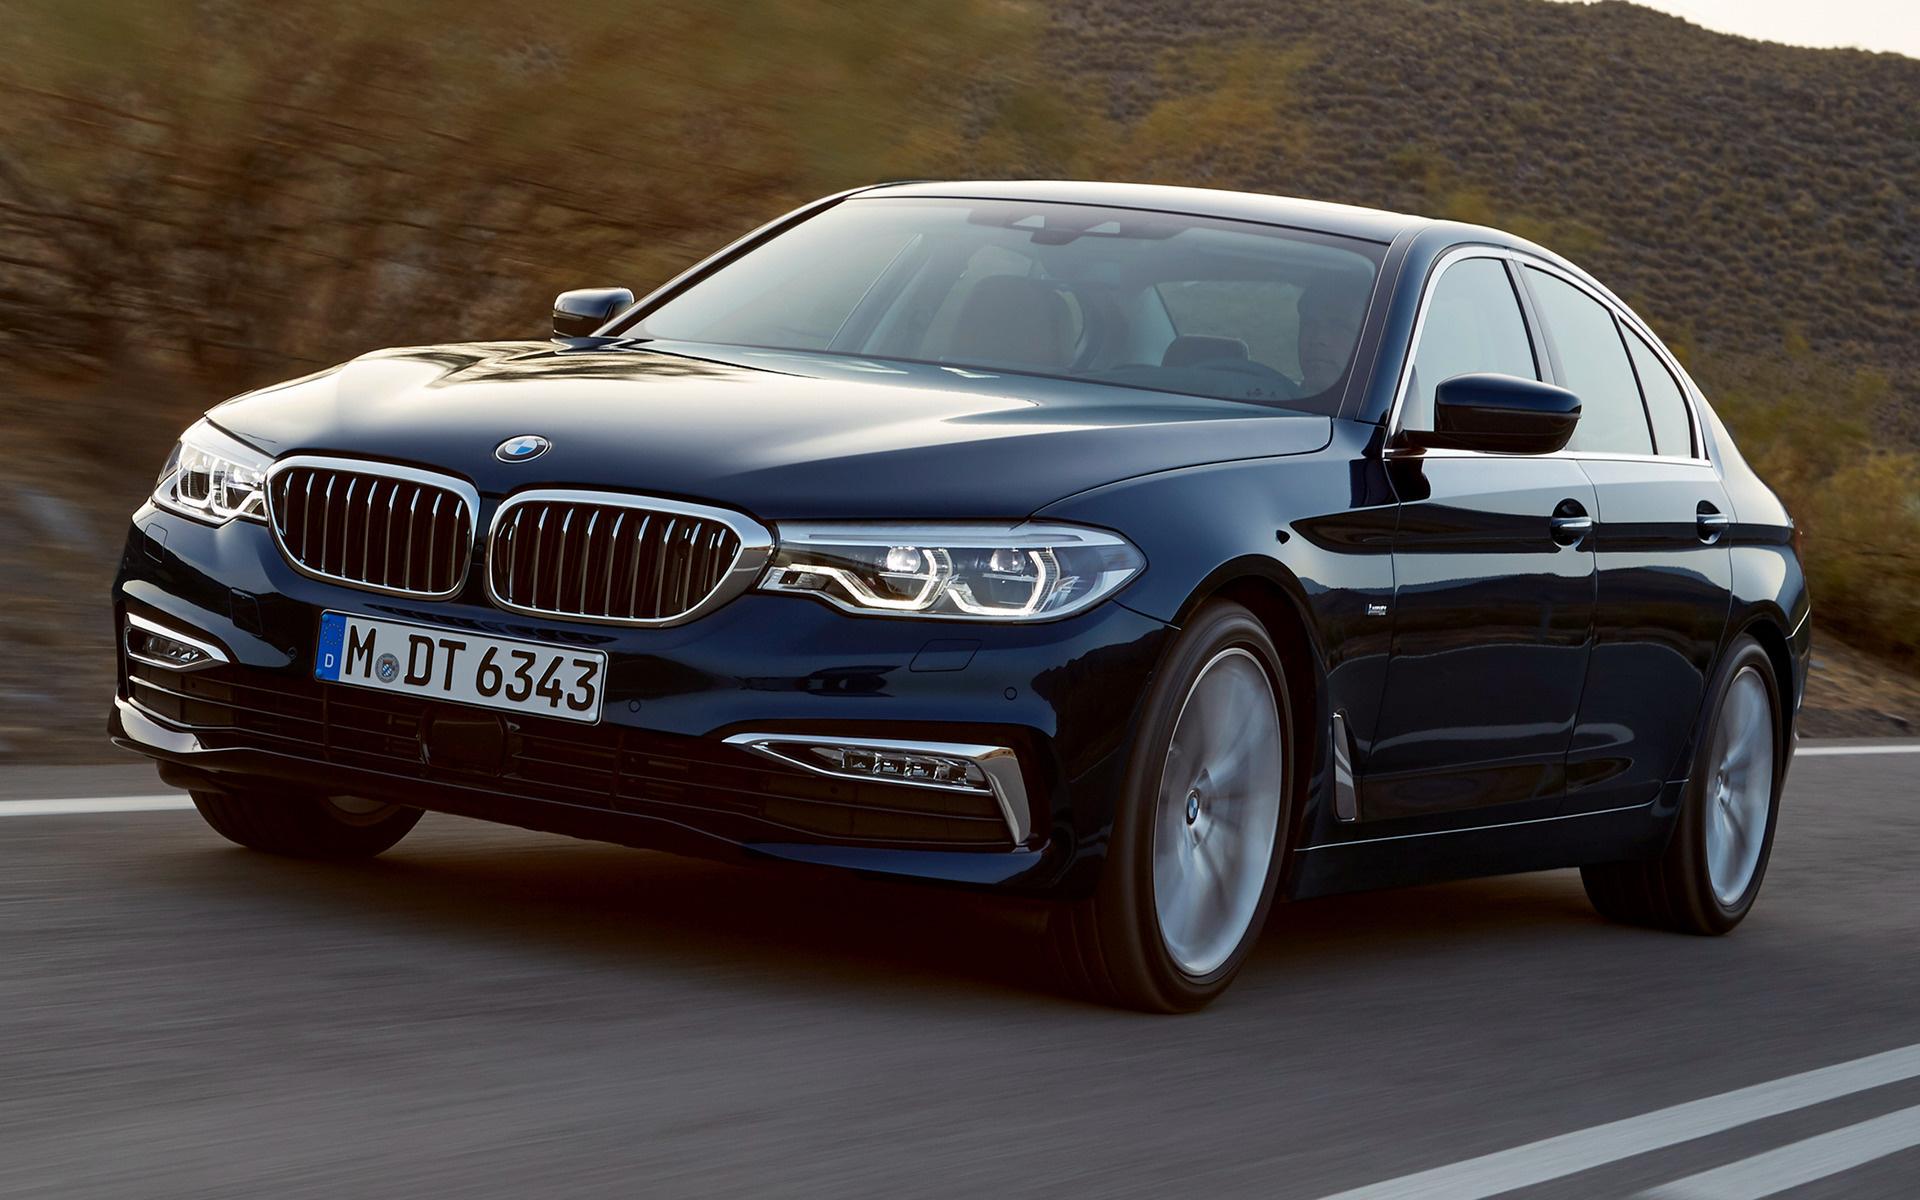 BMW 5 Series and HD Image